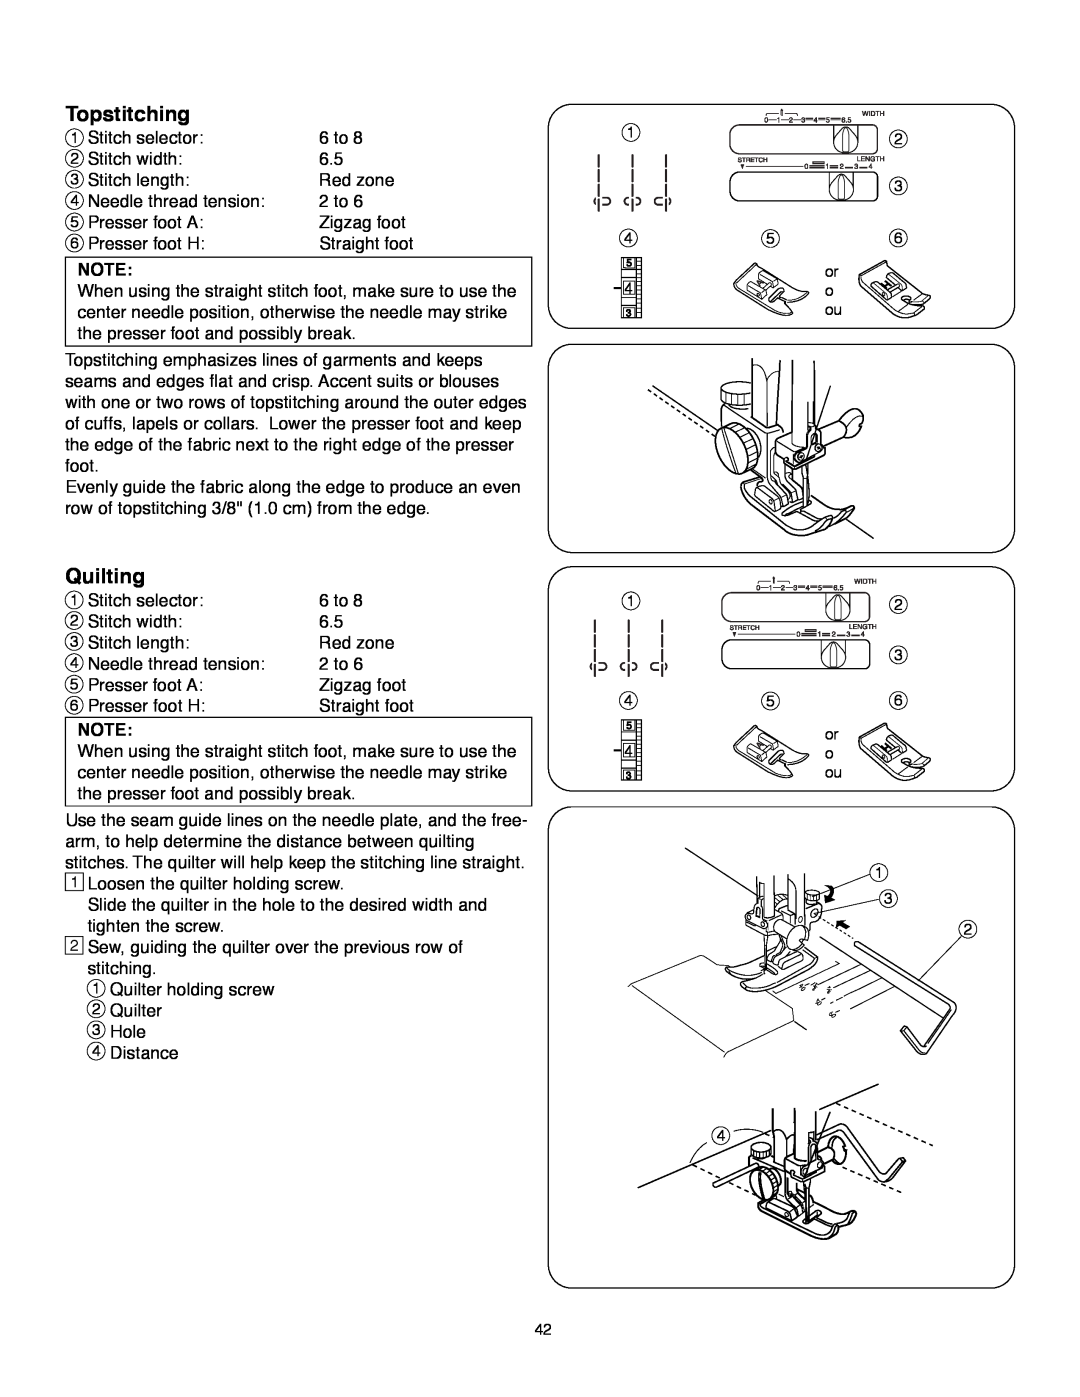 Janome MS-5027 instruction manual Topstitching, Quilting 